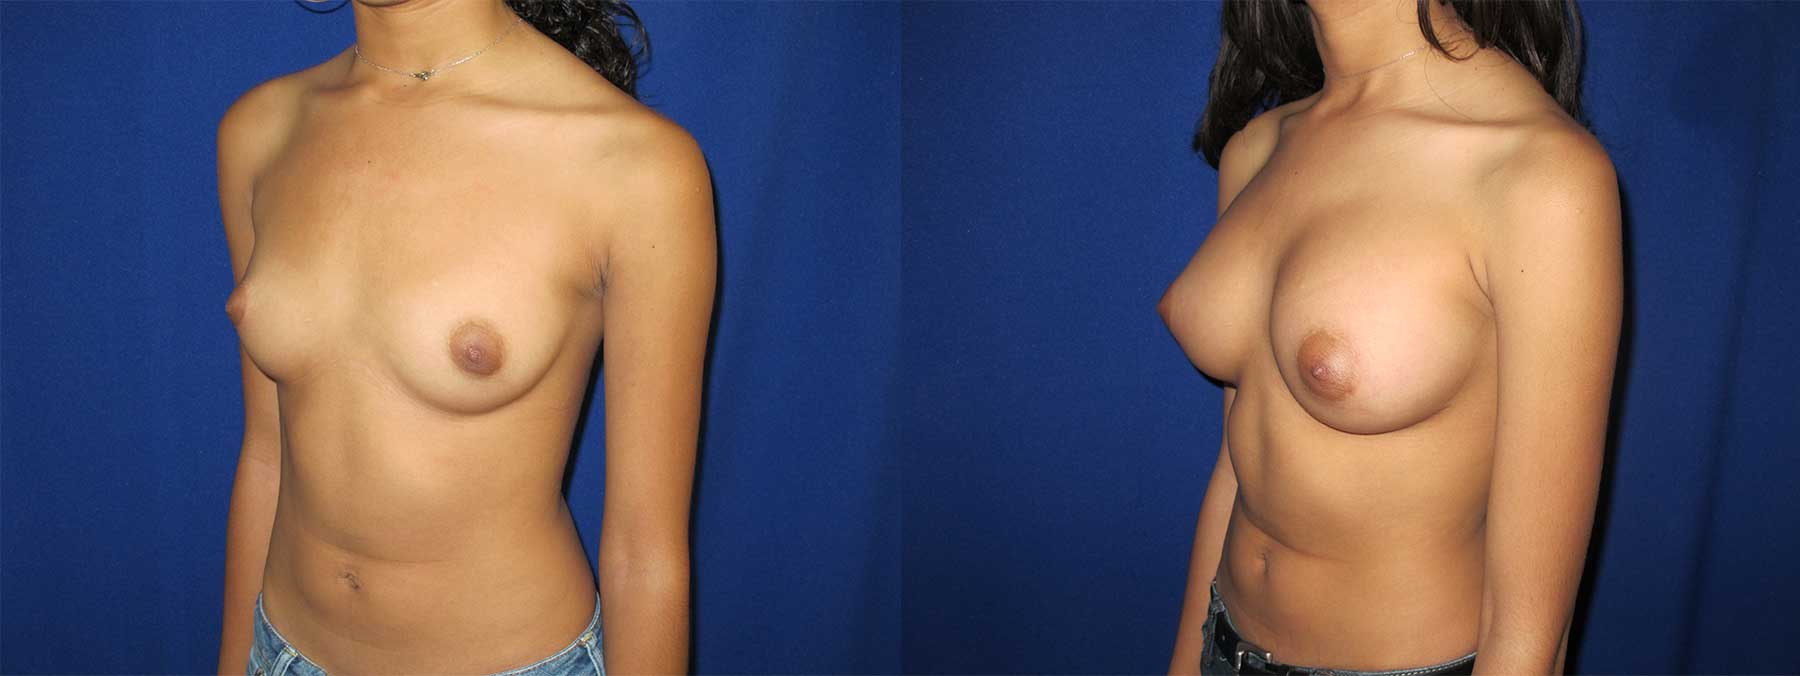 Before and After Image of Augmentation Mammoplasty